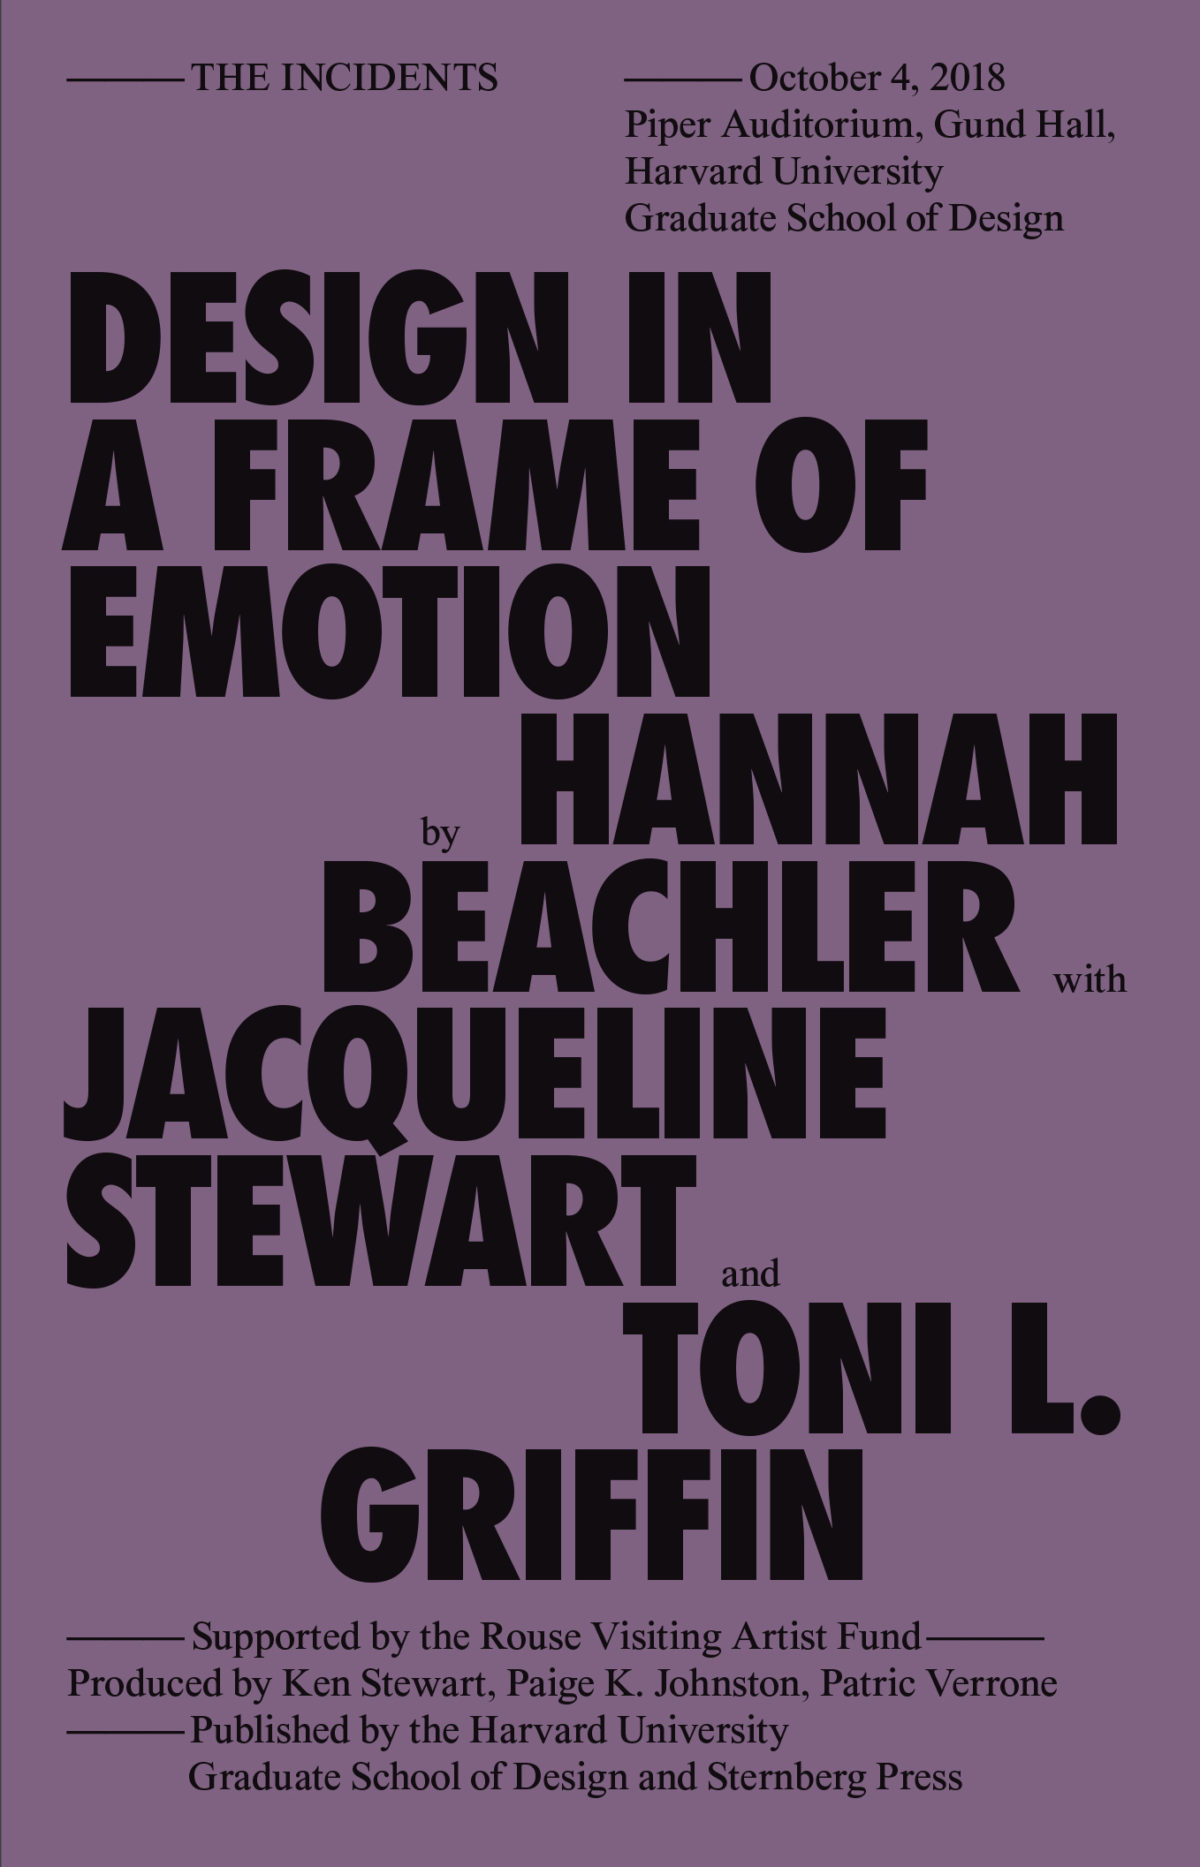 Harvard GSD – The Incidents – Design in a Frame of Emotion – Hannah Beachler with Jacqueline Stewart and Toni L. Griffin